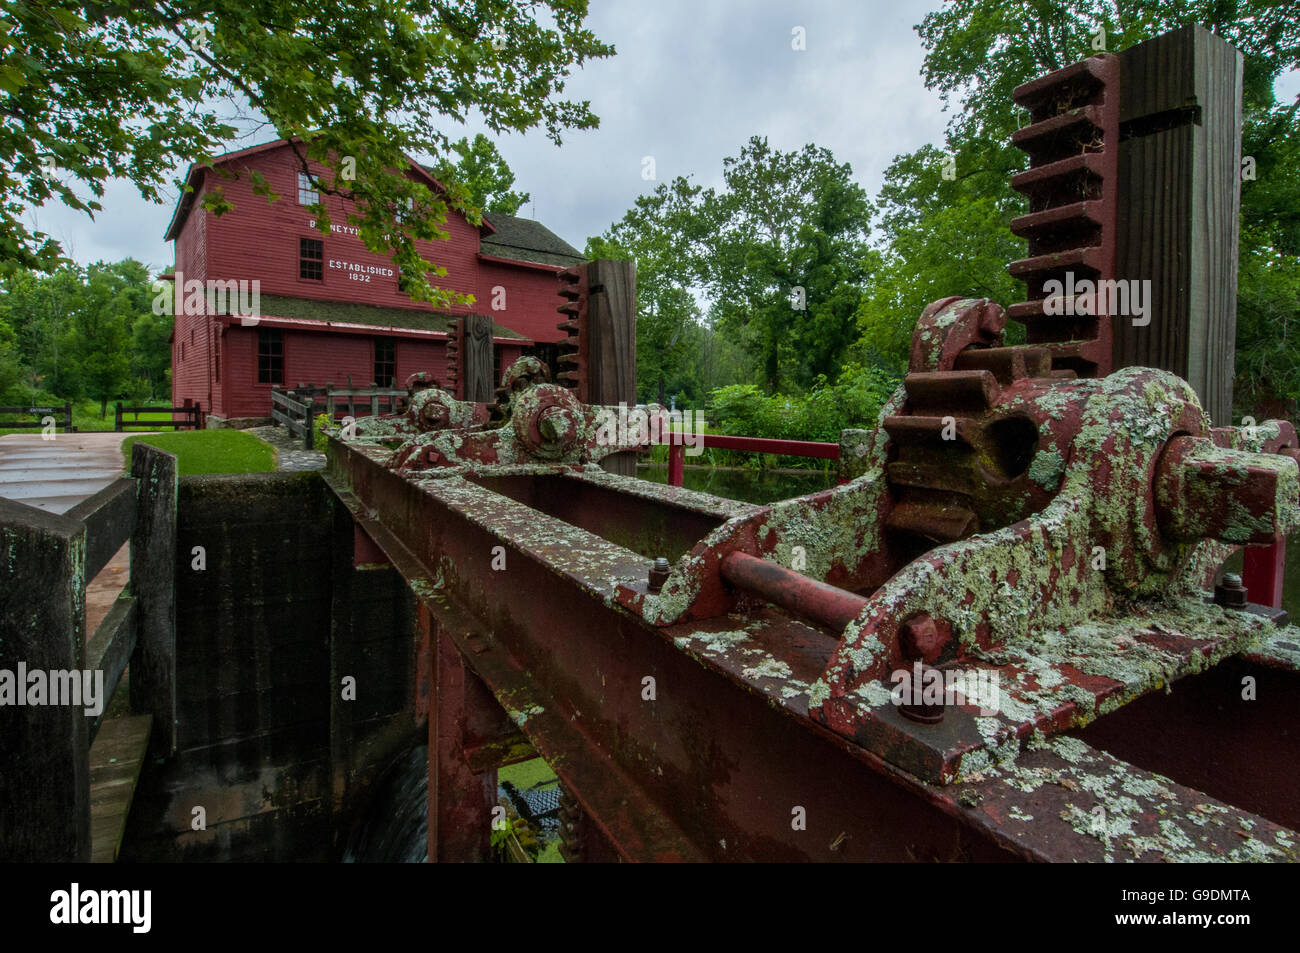 The gears and machinery to raise and lower water level at a grist mill. Stock Photo